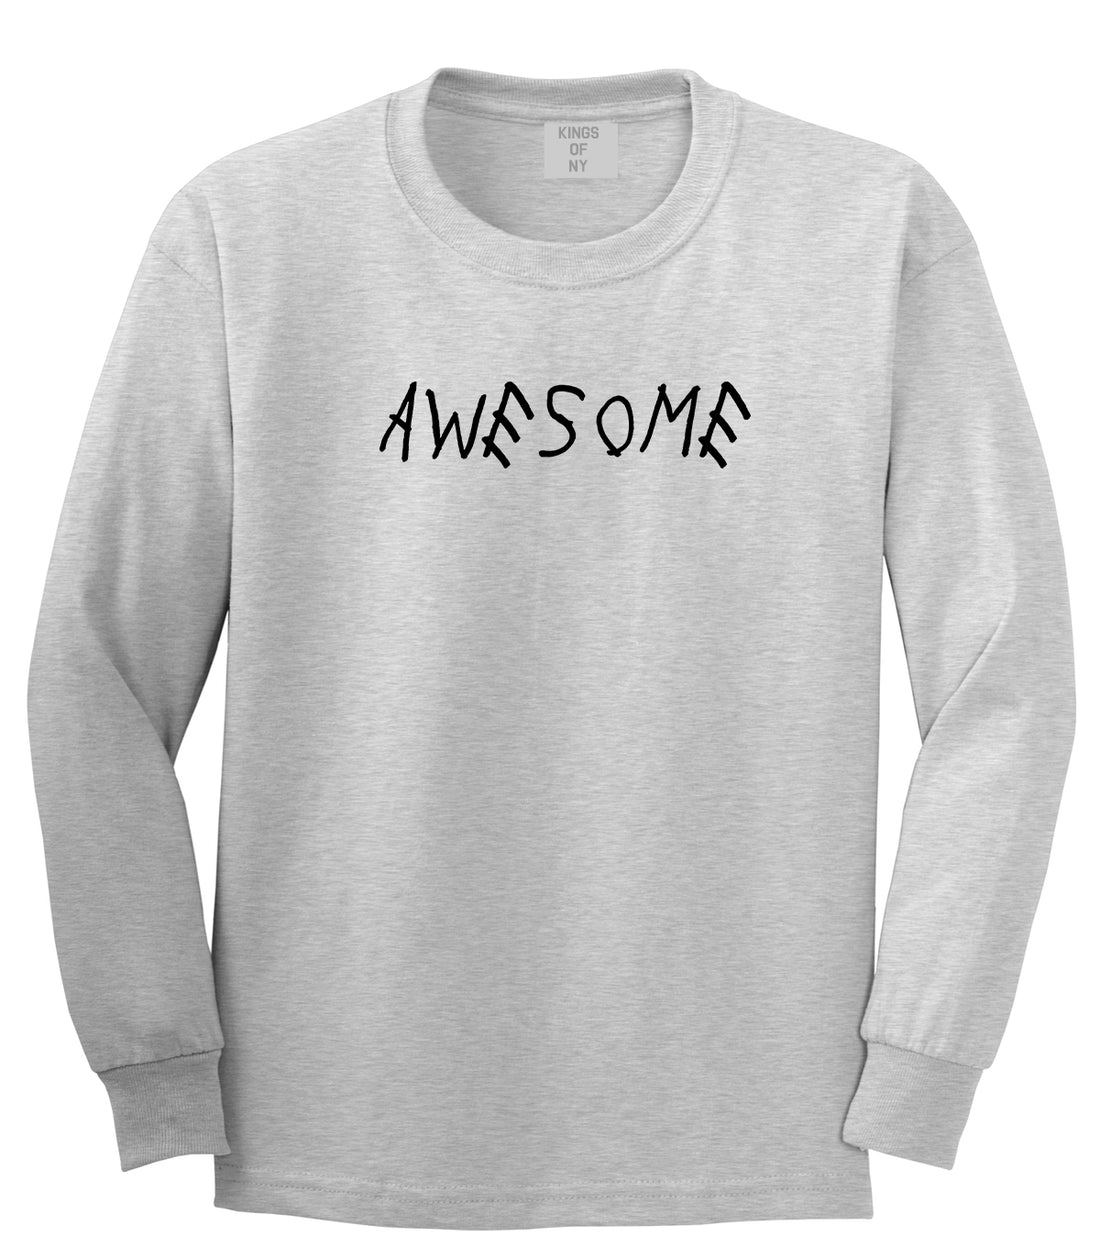 Awesome Grey Long Sleeve T-Shirt by Kings Of NY